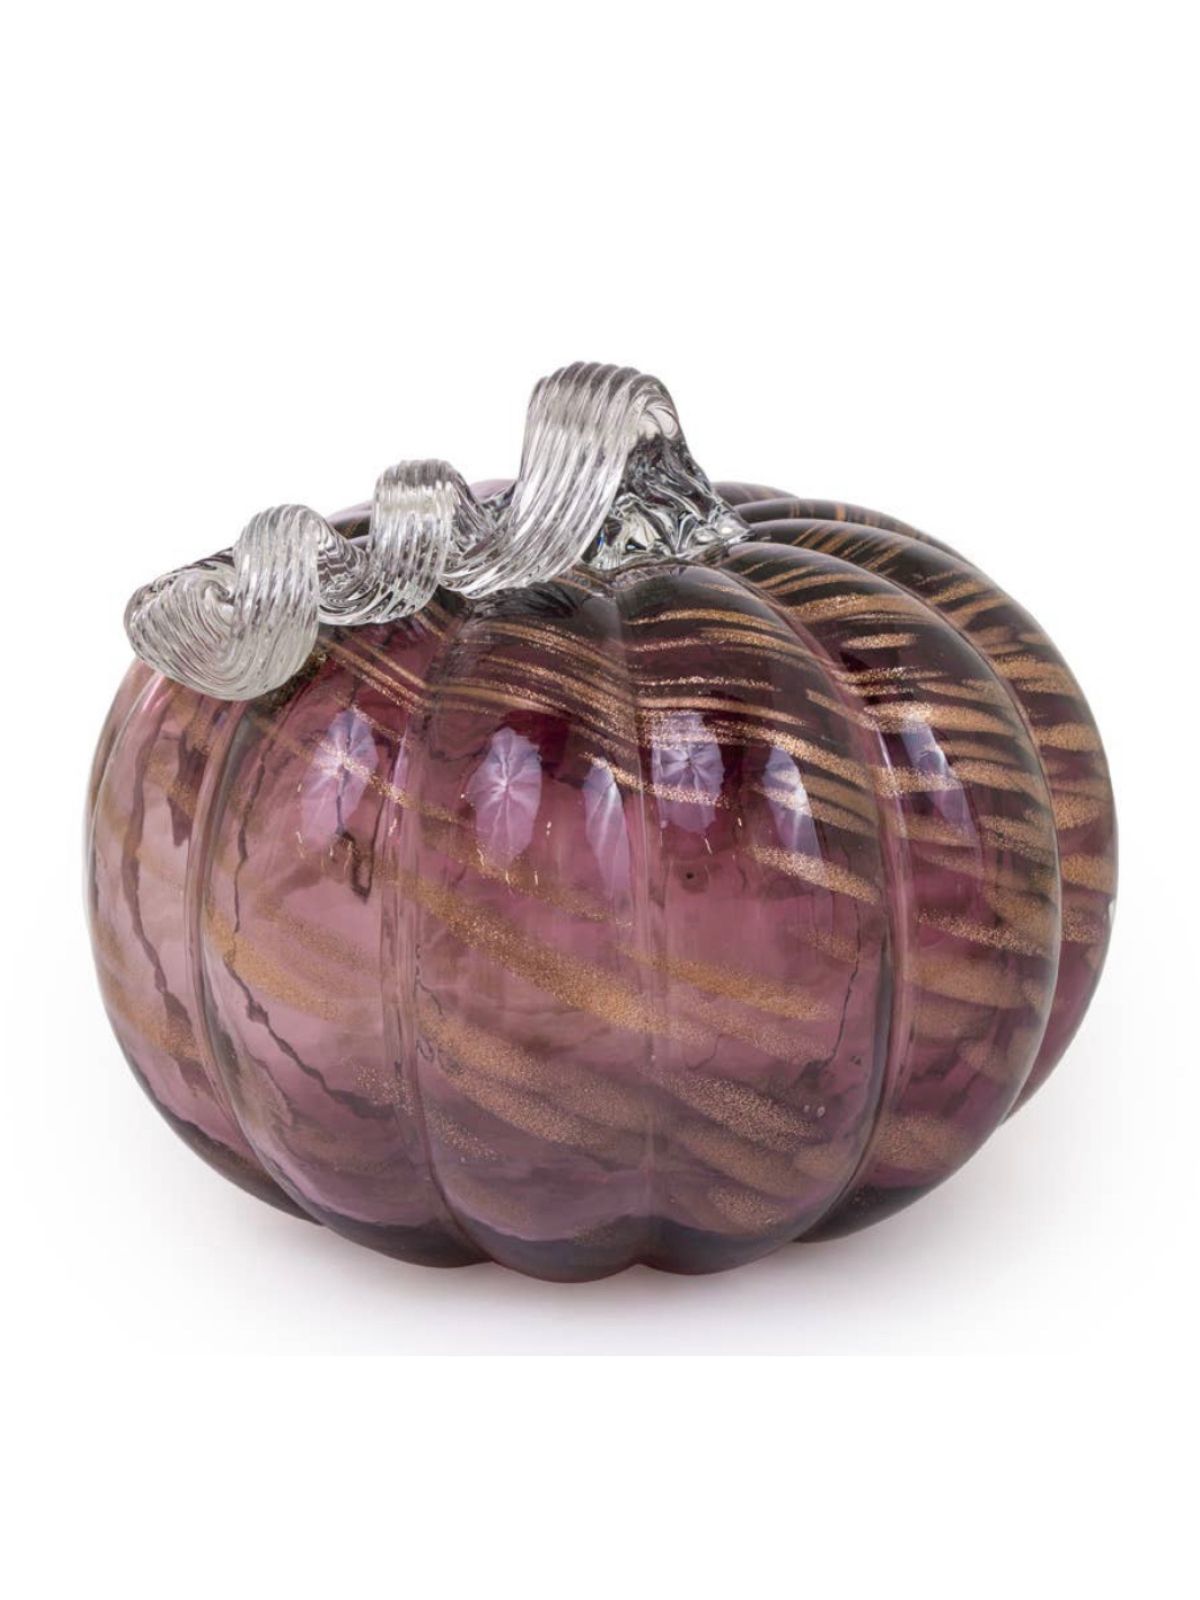 This Gorgeous mauve glass pumpkin makes an ideal seasonal table top or mantle display. Display alone or pair with more glass pumpkins and create your own seasonal arrangement.